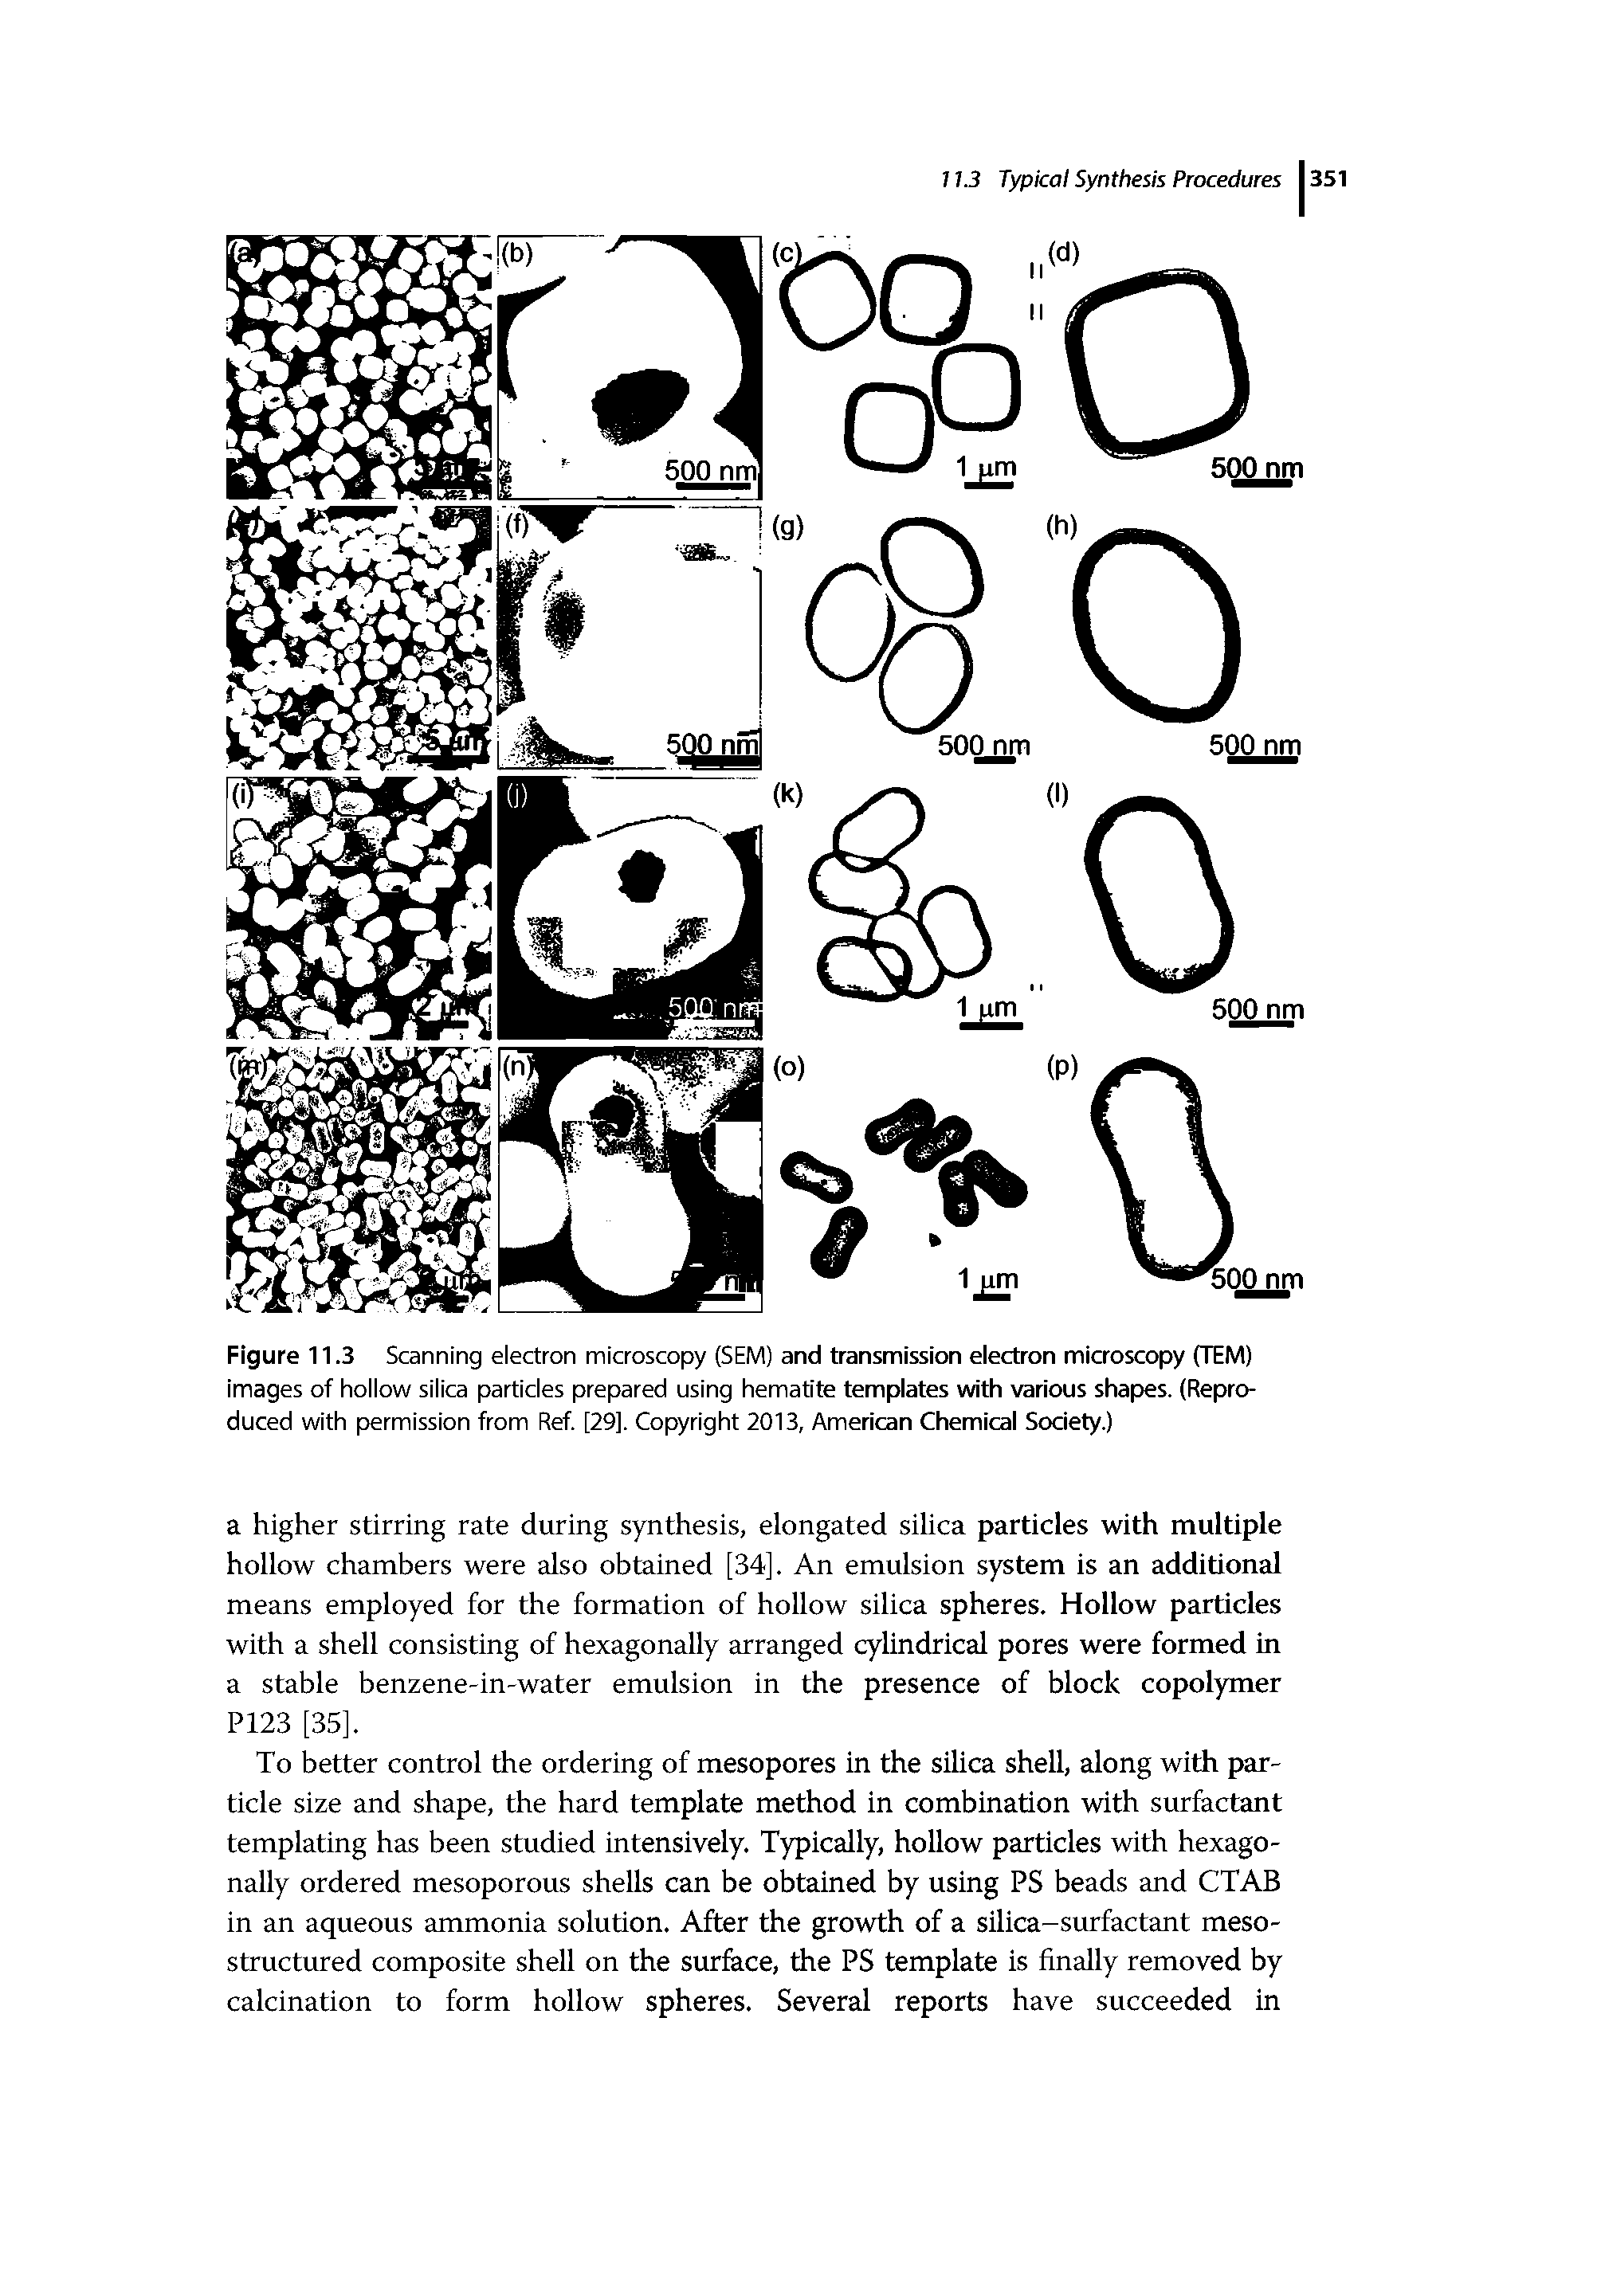 Figure 11.3 Scanning electron microscopy (SEM) and transmission eiectron microscopy (TEM) images of hollow silica particles prepared using hematite templates with various shapes. (Reproduced with permission from Ref. [29]. Copyright 2013, American Chemical Society.)...